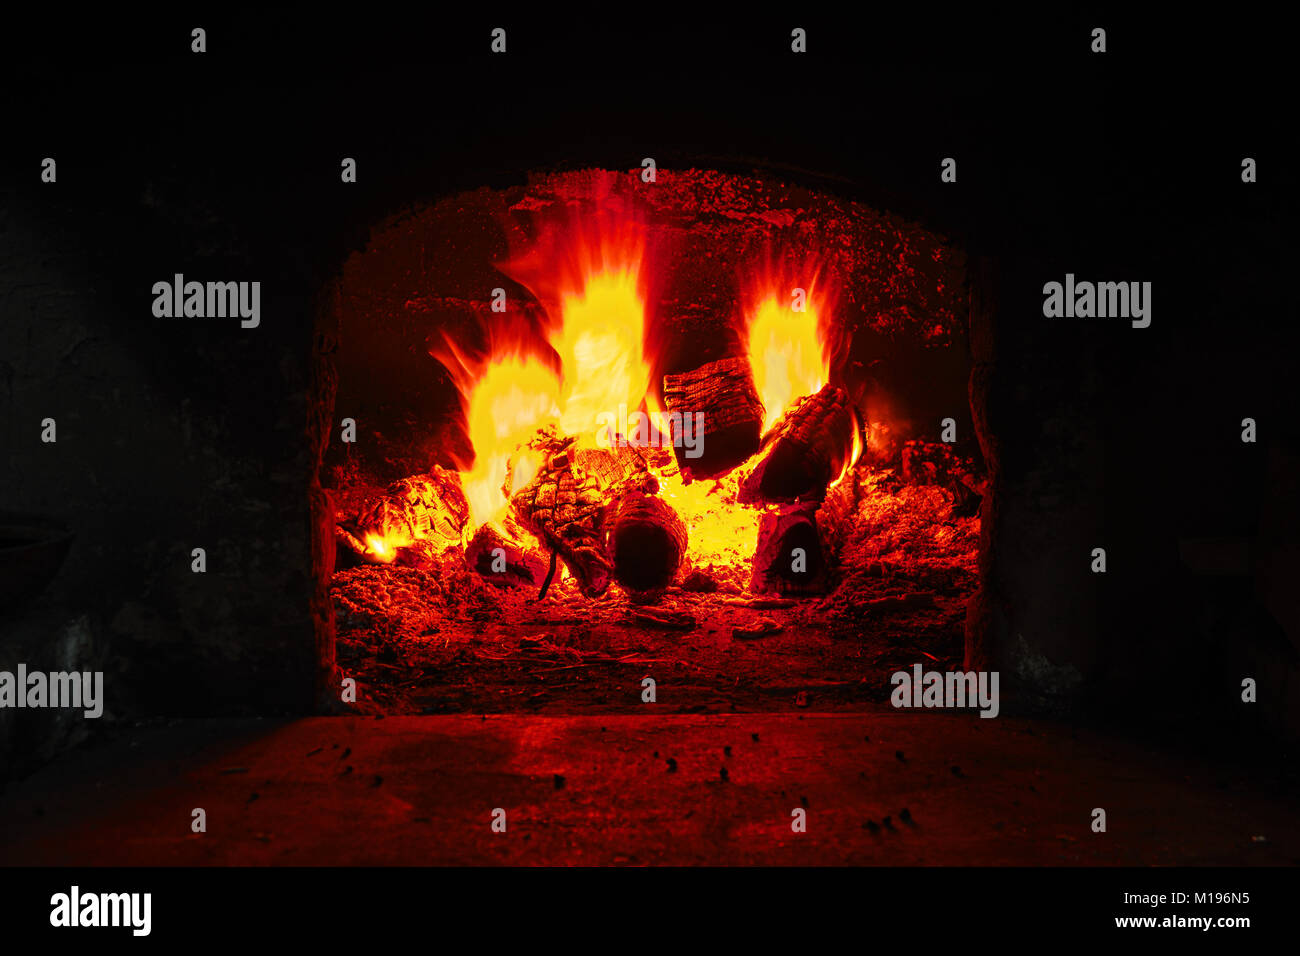 Firewood burning in brick oven, fire flame closeup. Flame on burning wood in stone fireplace from firebricks Stock Photo